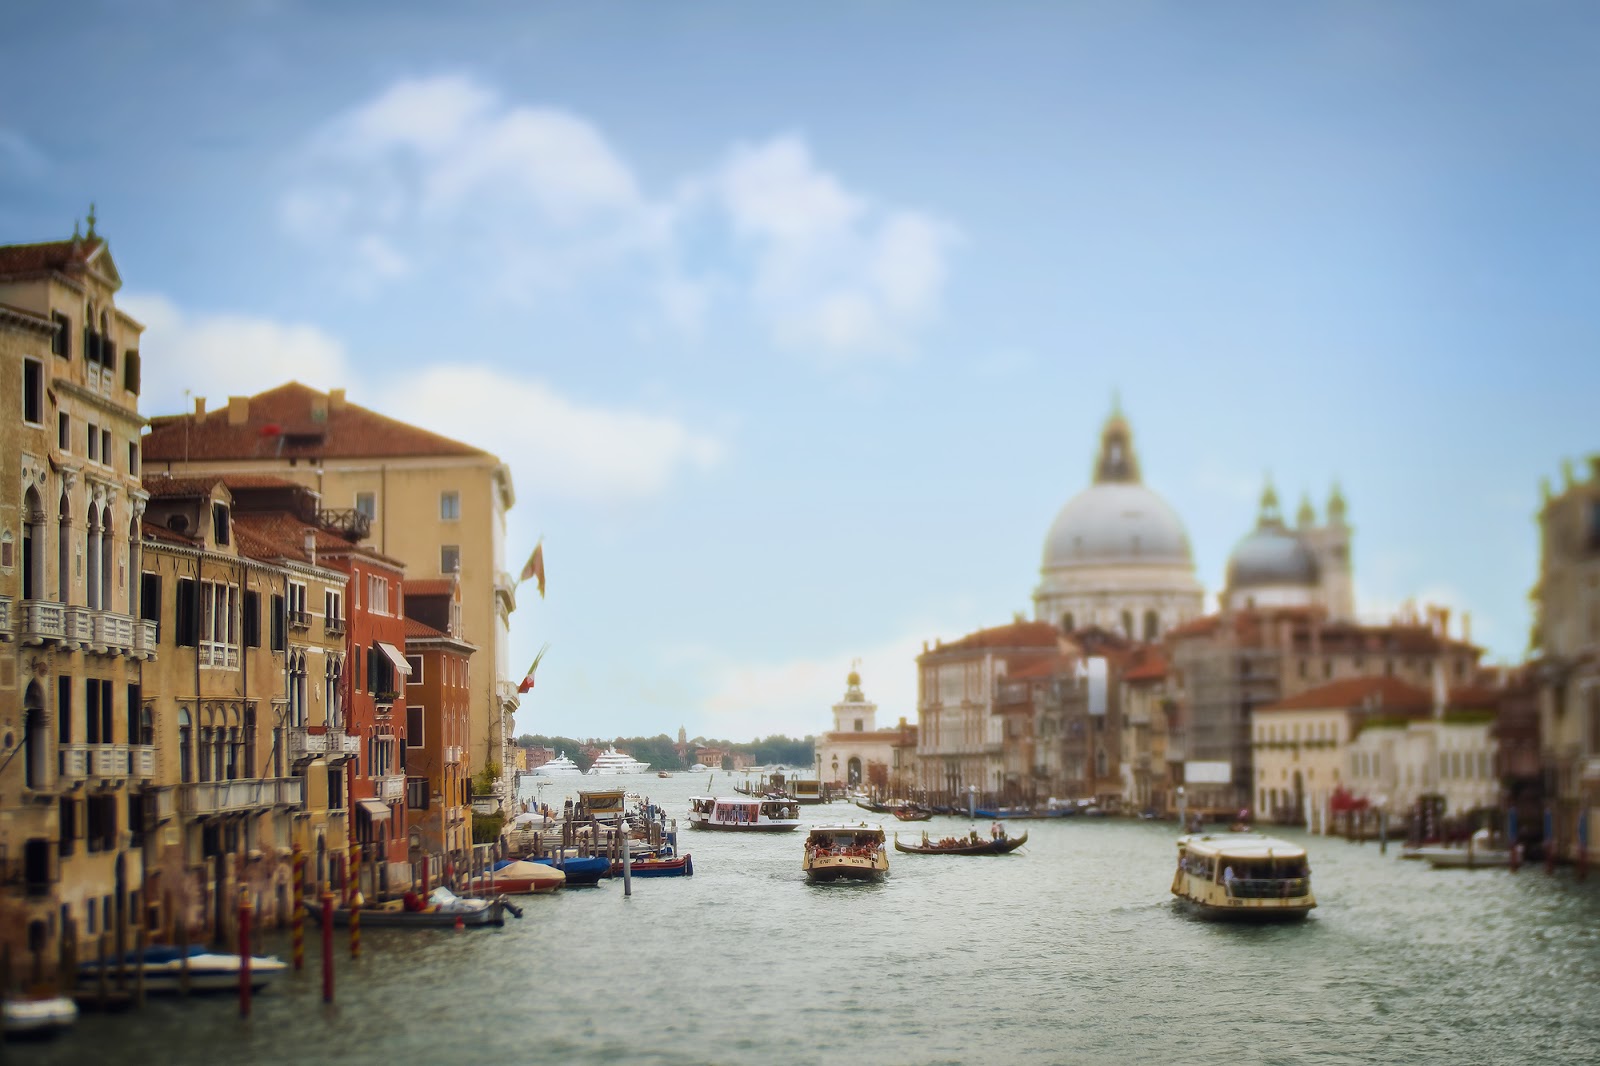 Fujifilm X-pro2 Lensbaby Image of Venice by Willie Kers